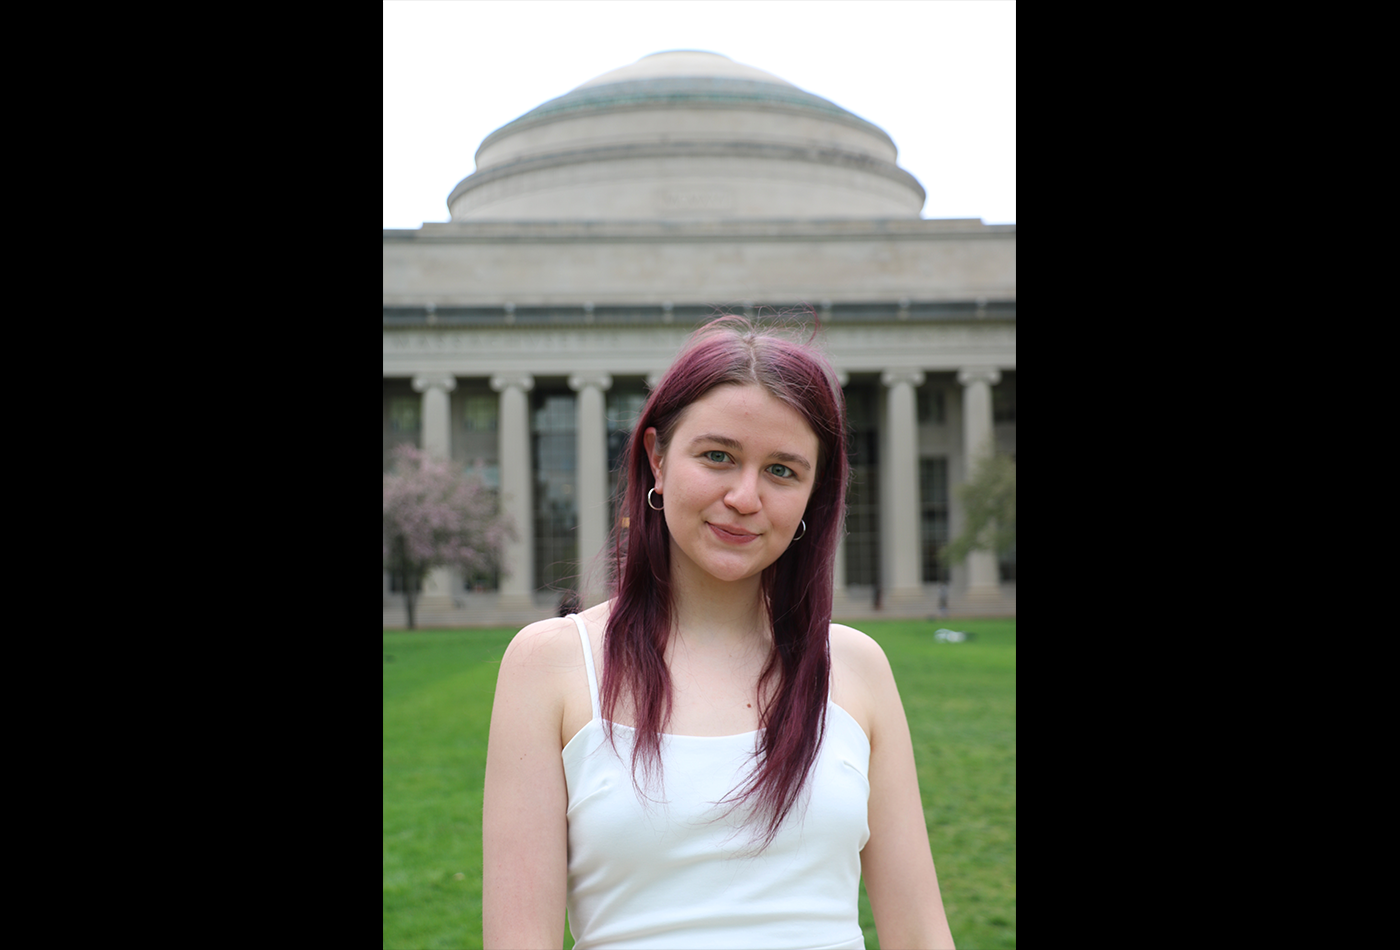 A young woman stands in front of the MIT Dome.